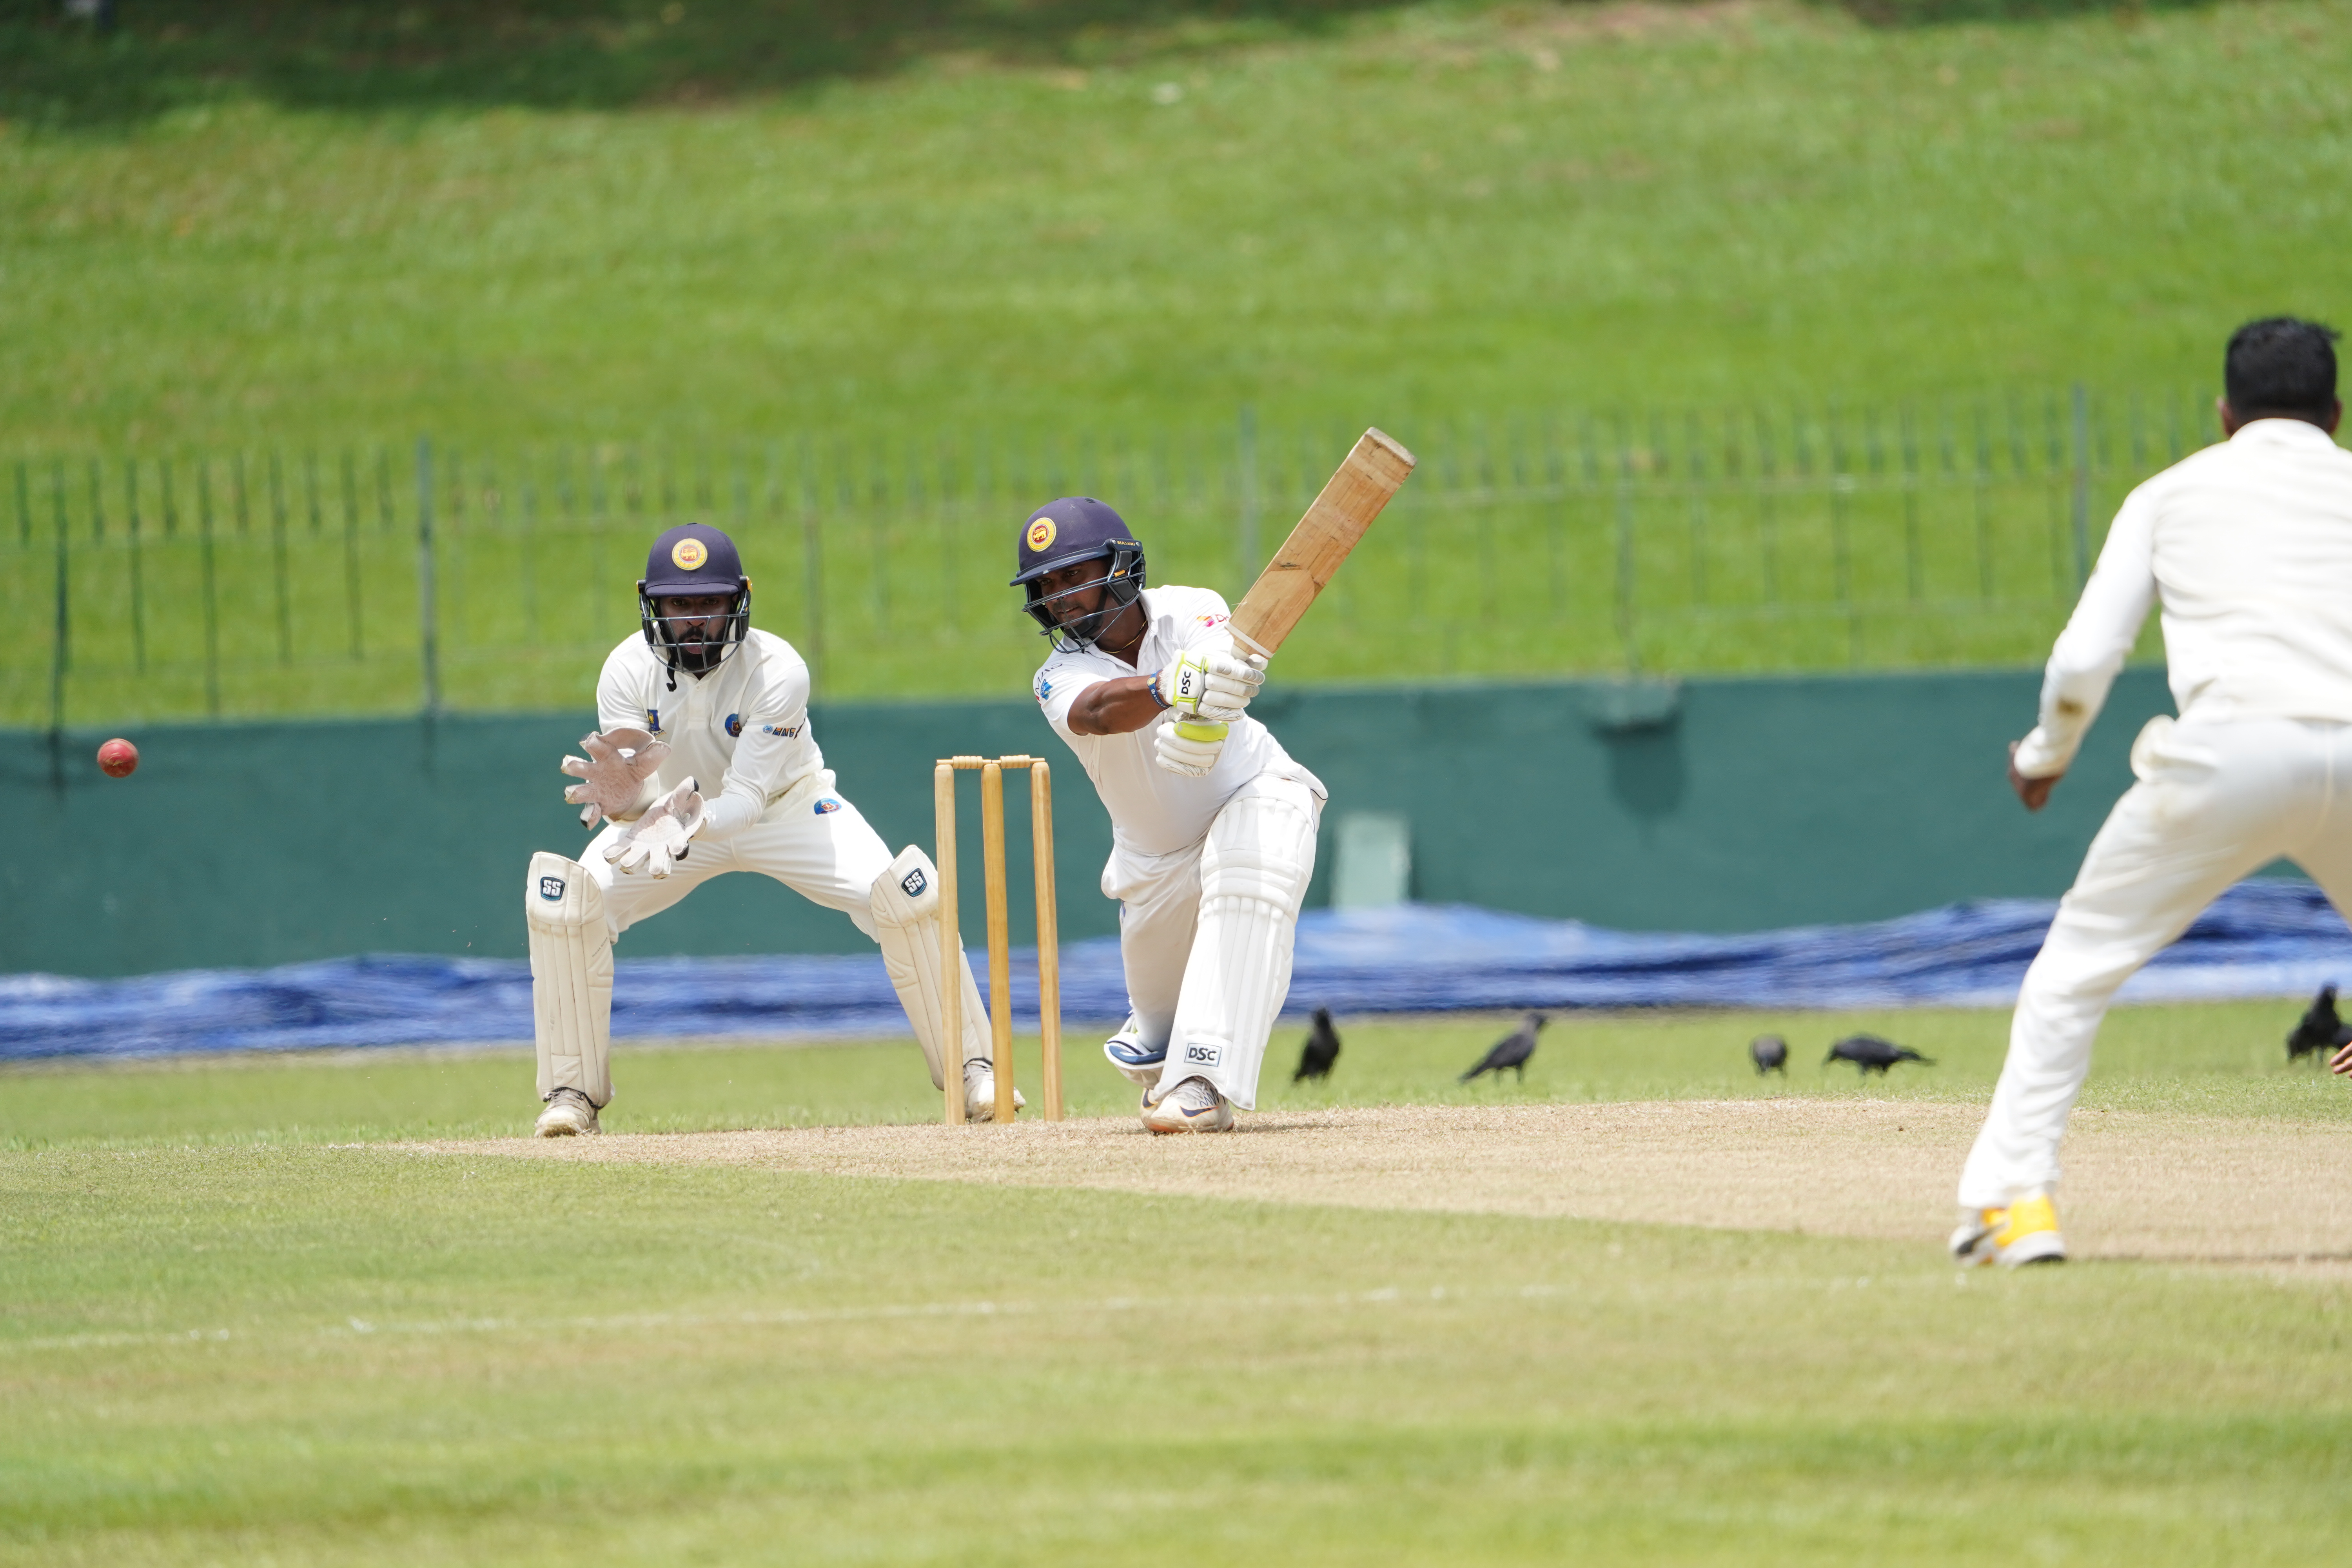 SLC MAJOR LEAGUE TIER A TAKES OFF WITH A BANG| Kusal Mendis fires unbeaten 132 : Mathews clouts 80 n.o.